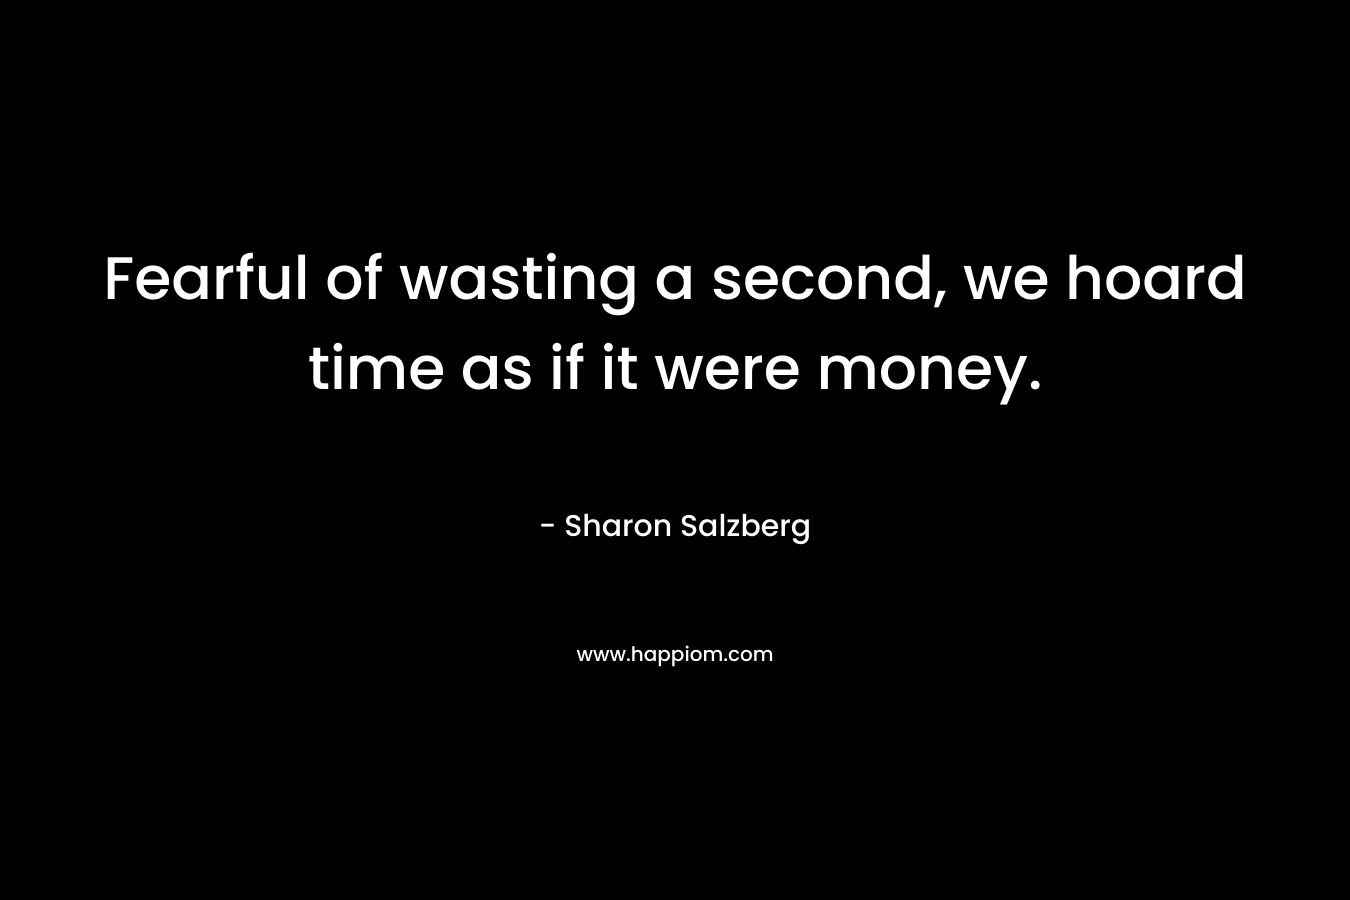 Fearful of wasting a second, we hoard time as if it were money. – Sharon Salzberg